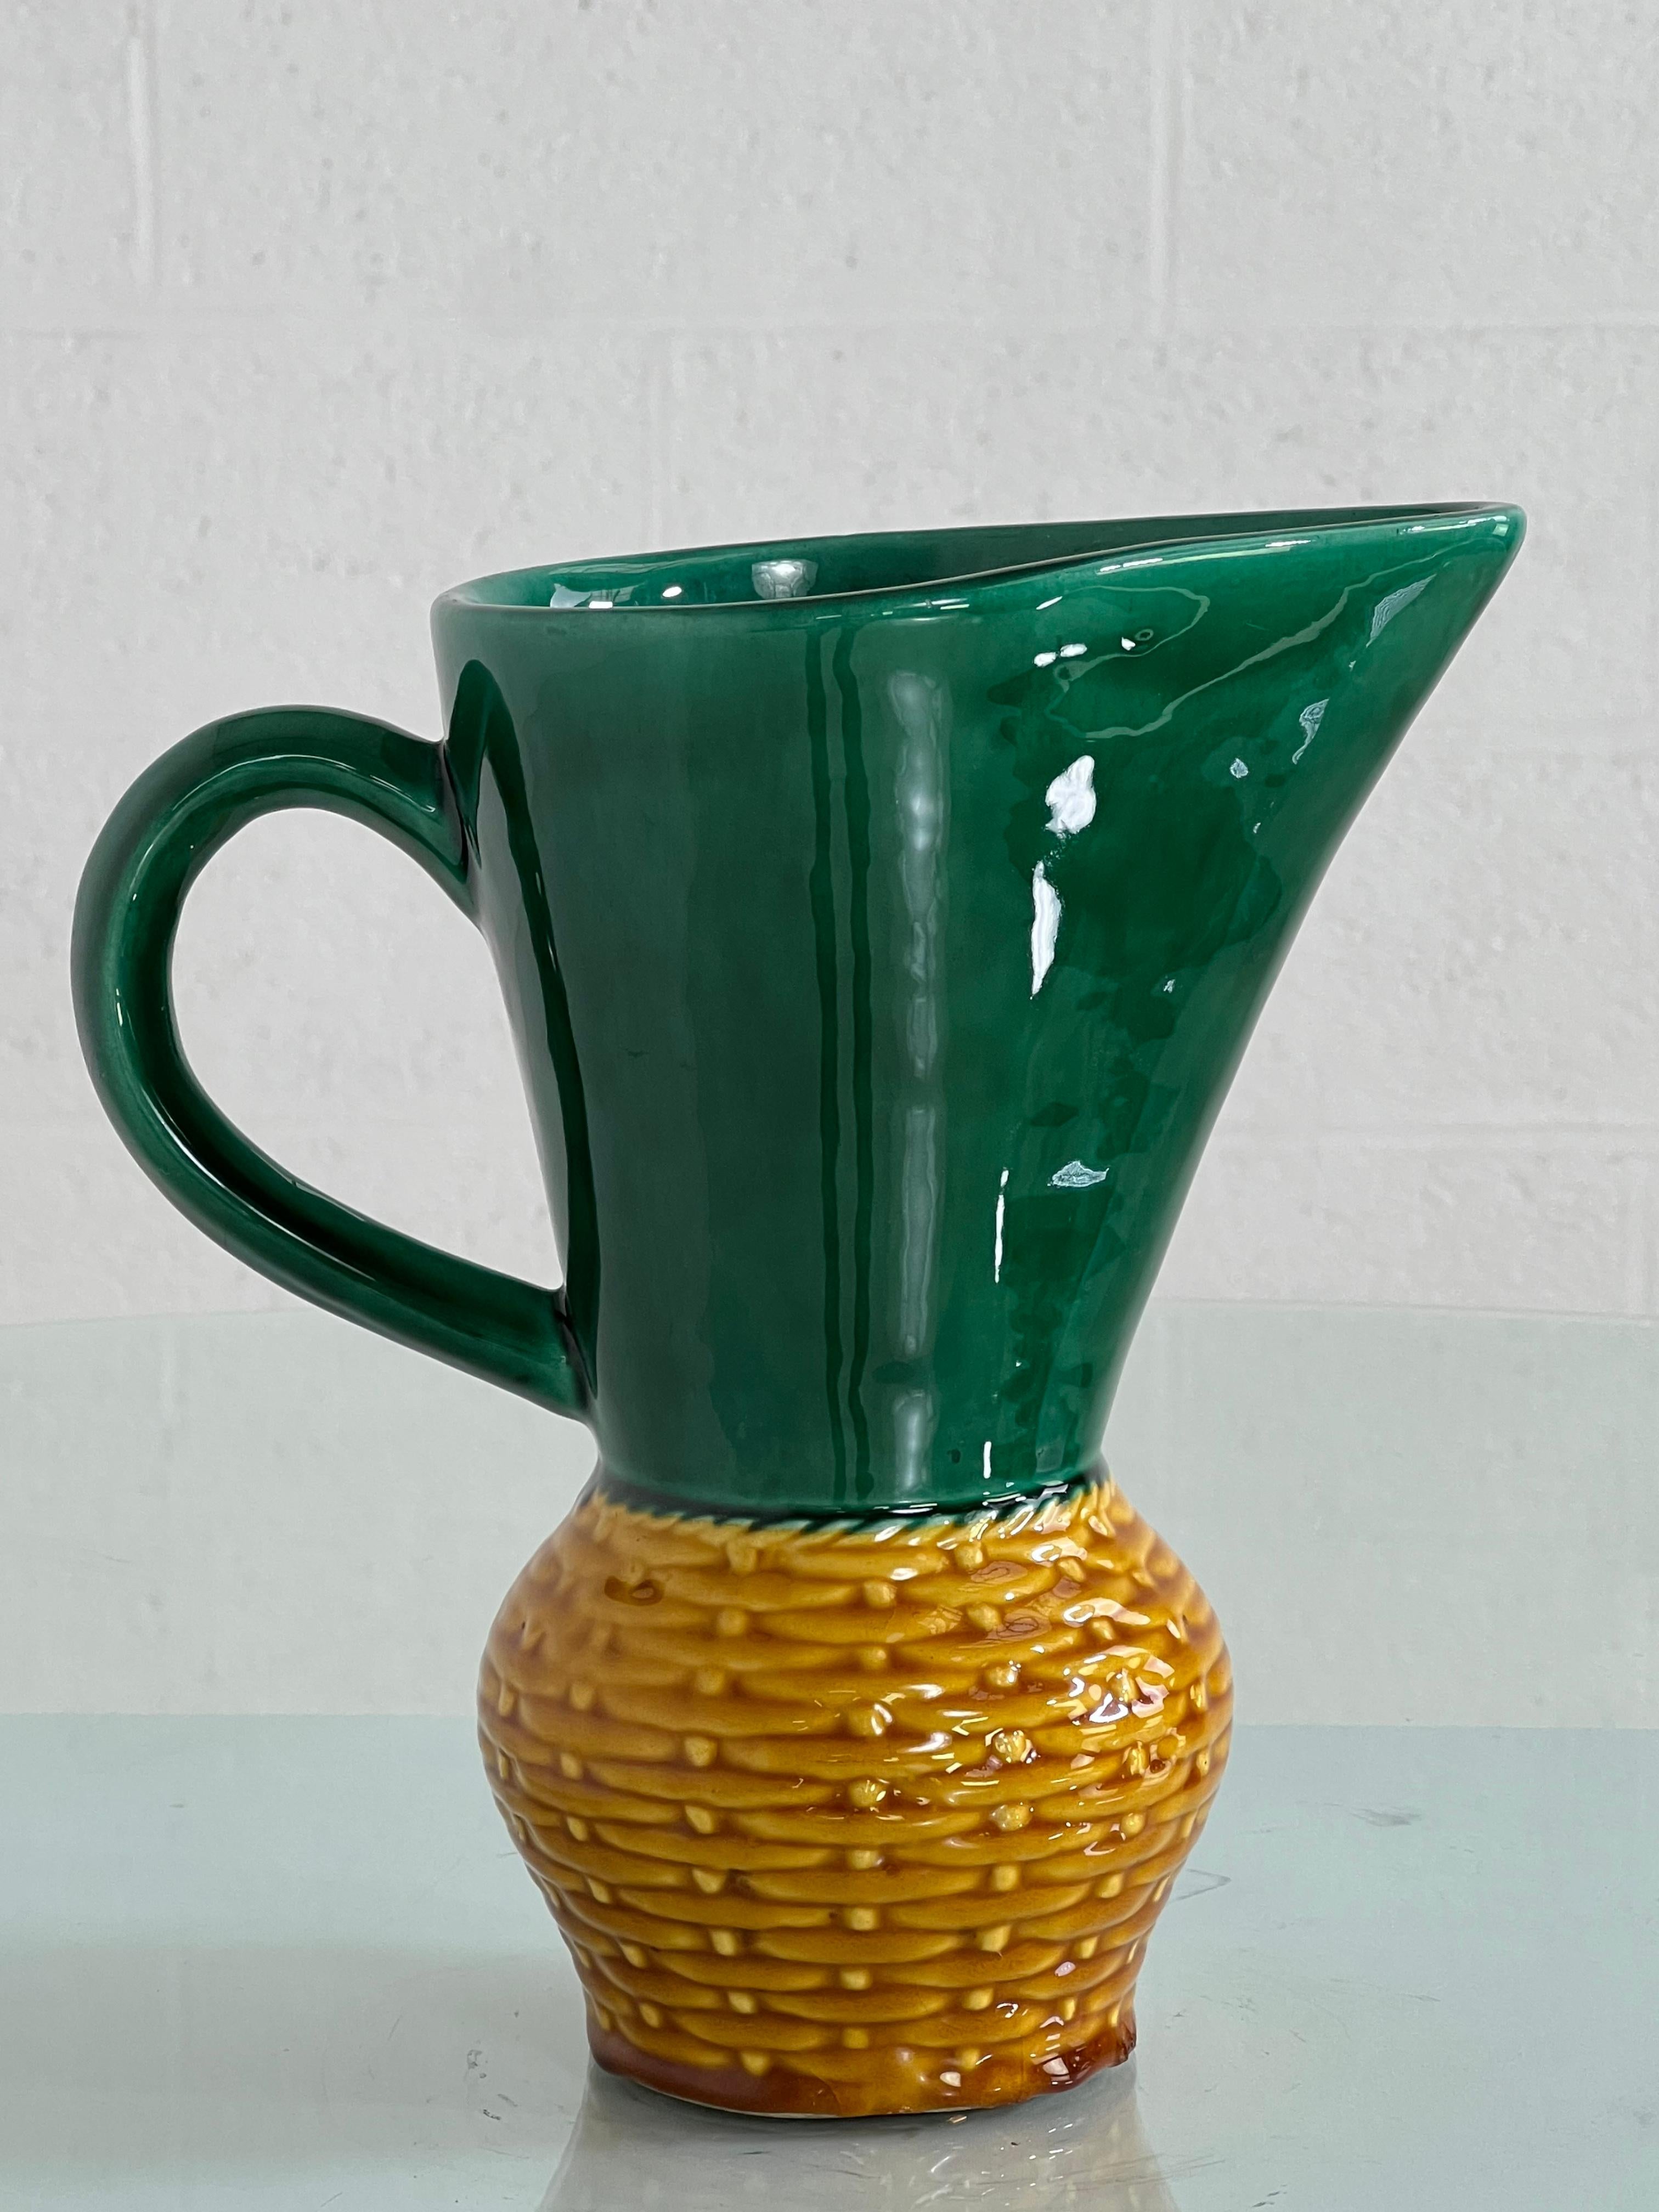 1960s Handmade Ceramic Pitcher Vase with a beautiful emerald color and yellow base in a braided wicker cane effect.